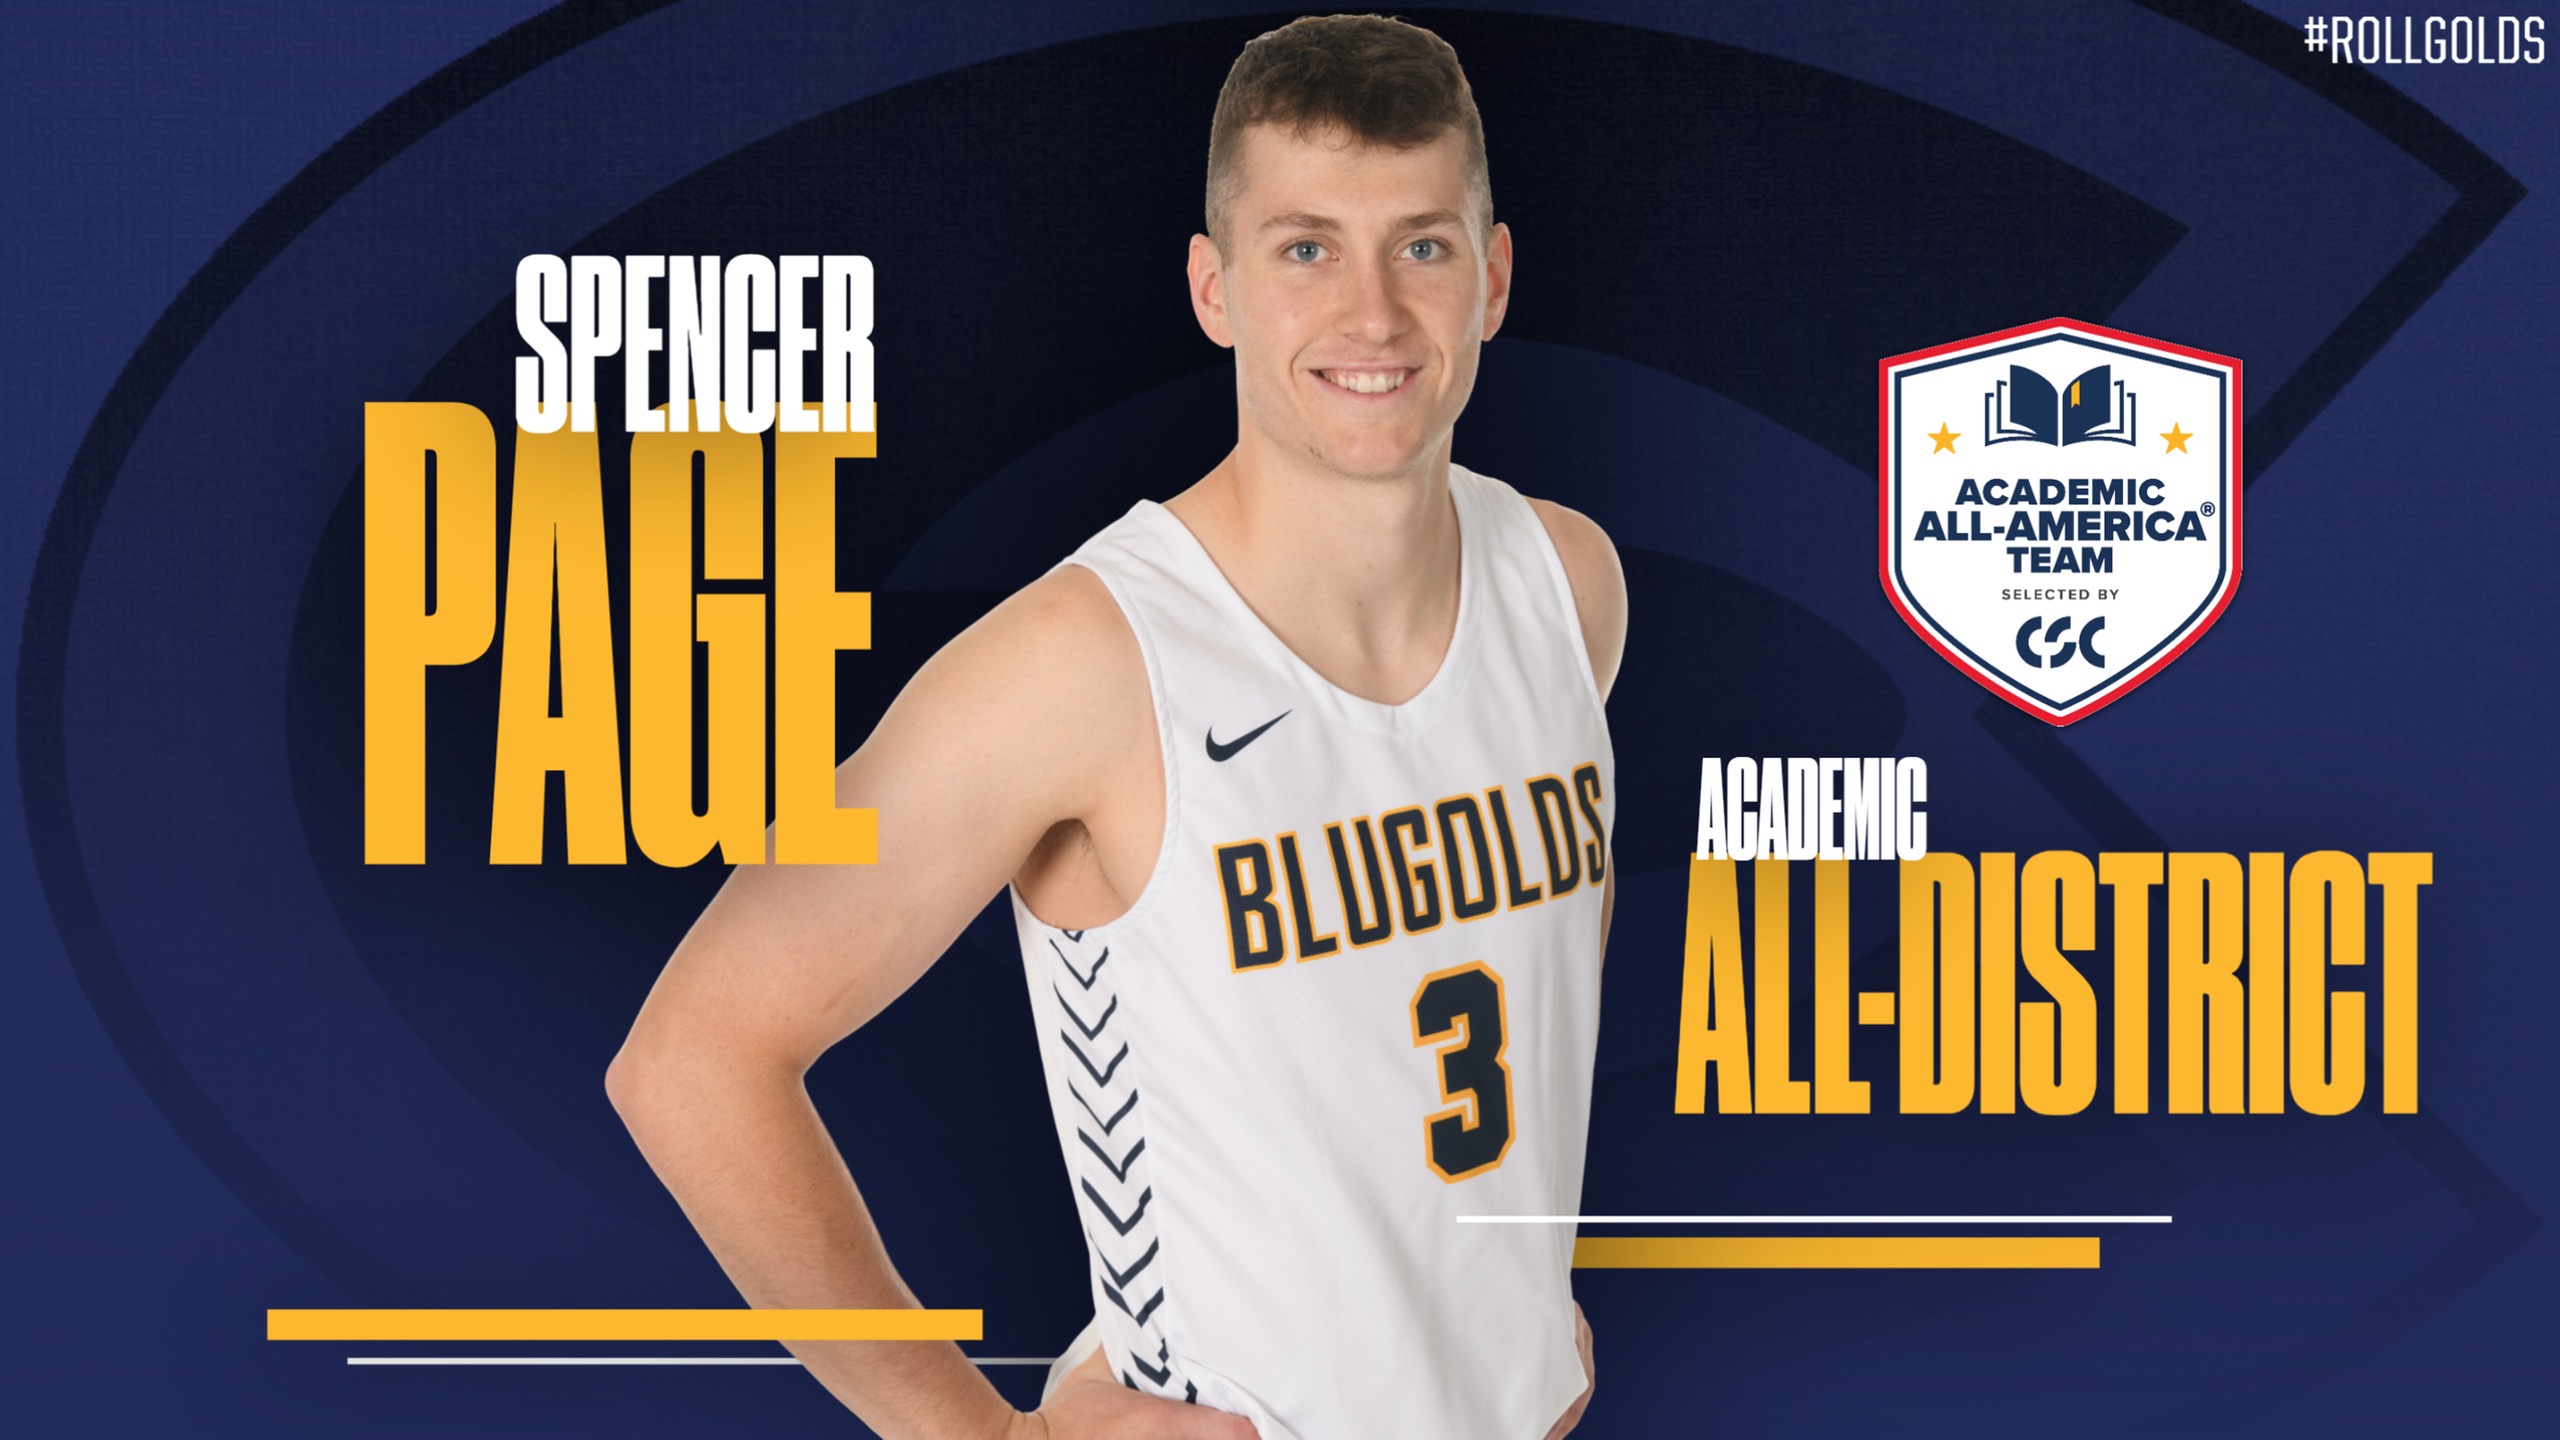 Page receives CSC Academic All-District honors